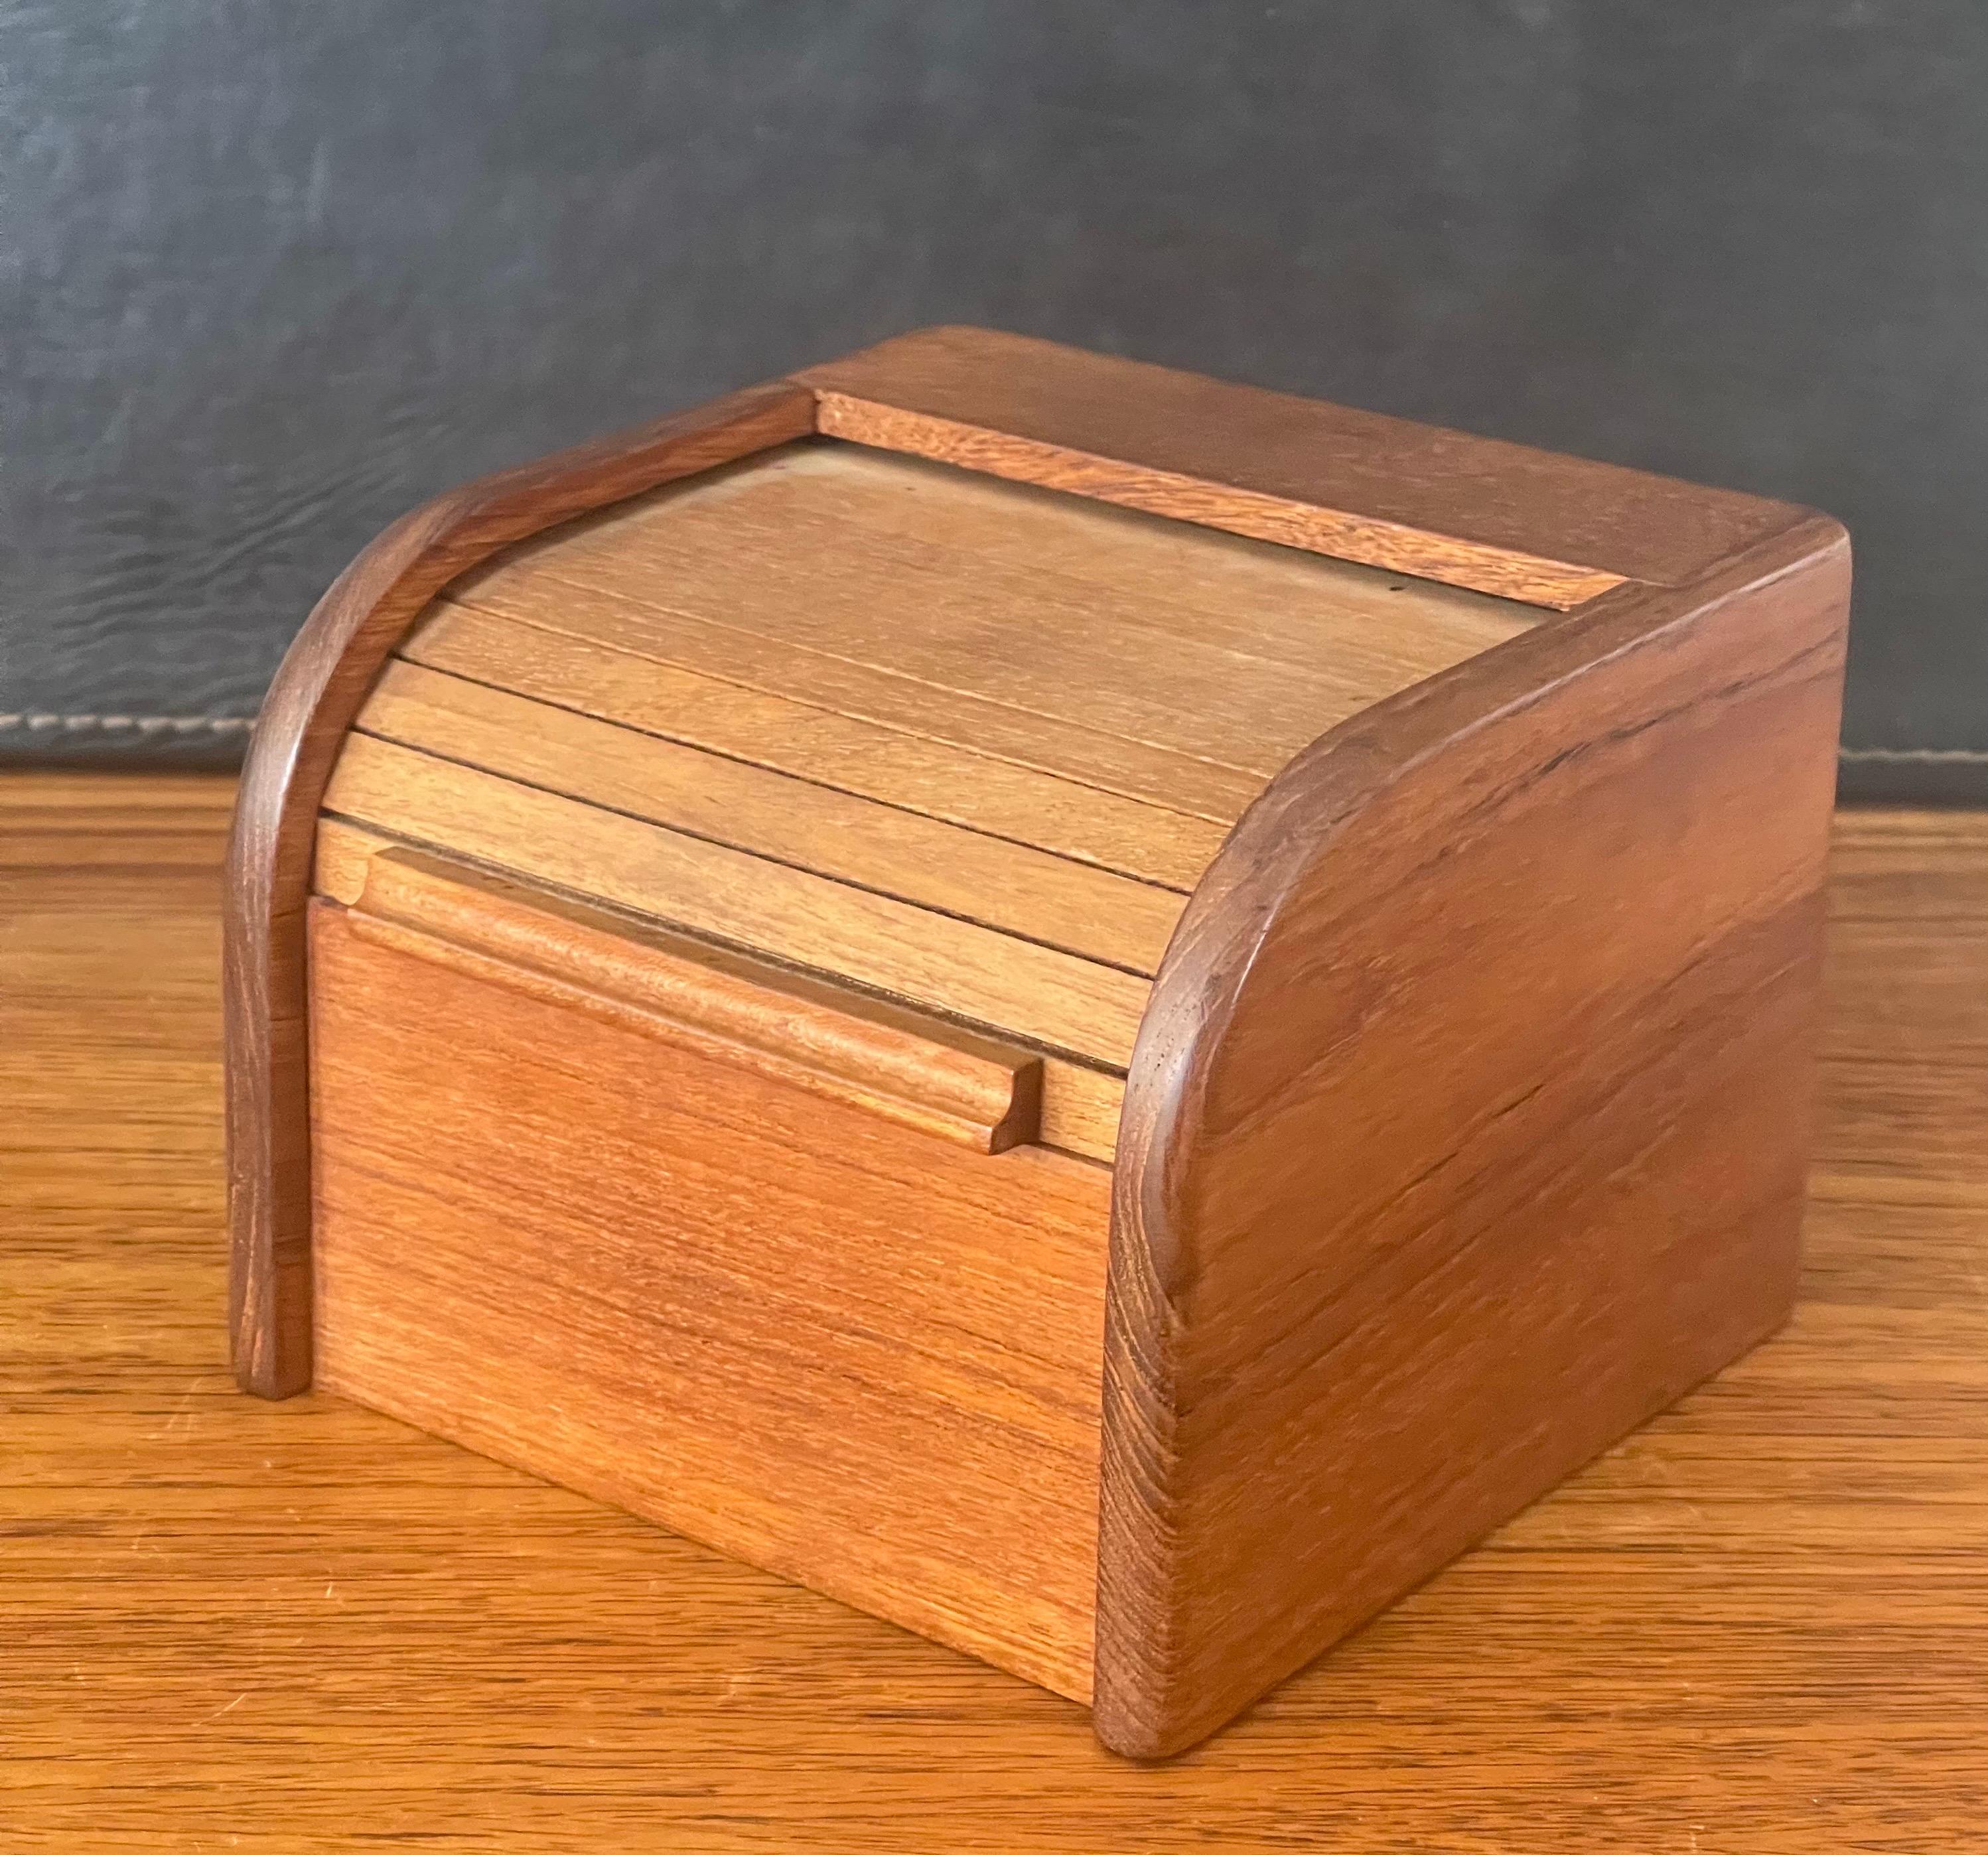 Danish modern small tambour teak box, circa 1970s. The box is in very good vintage condition and measures 6